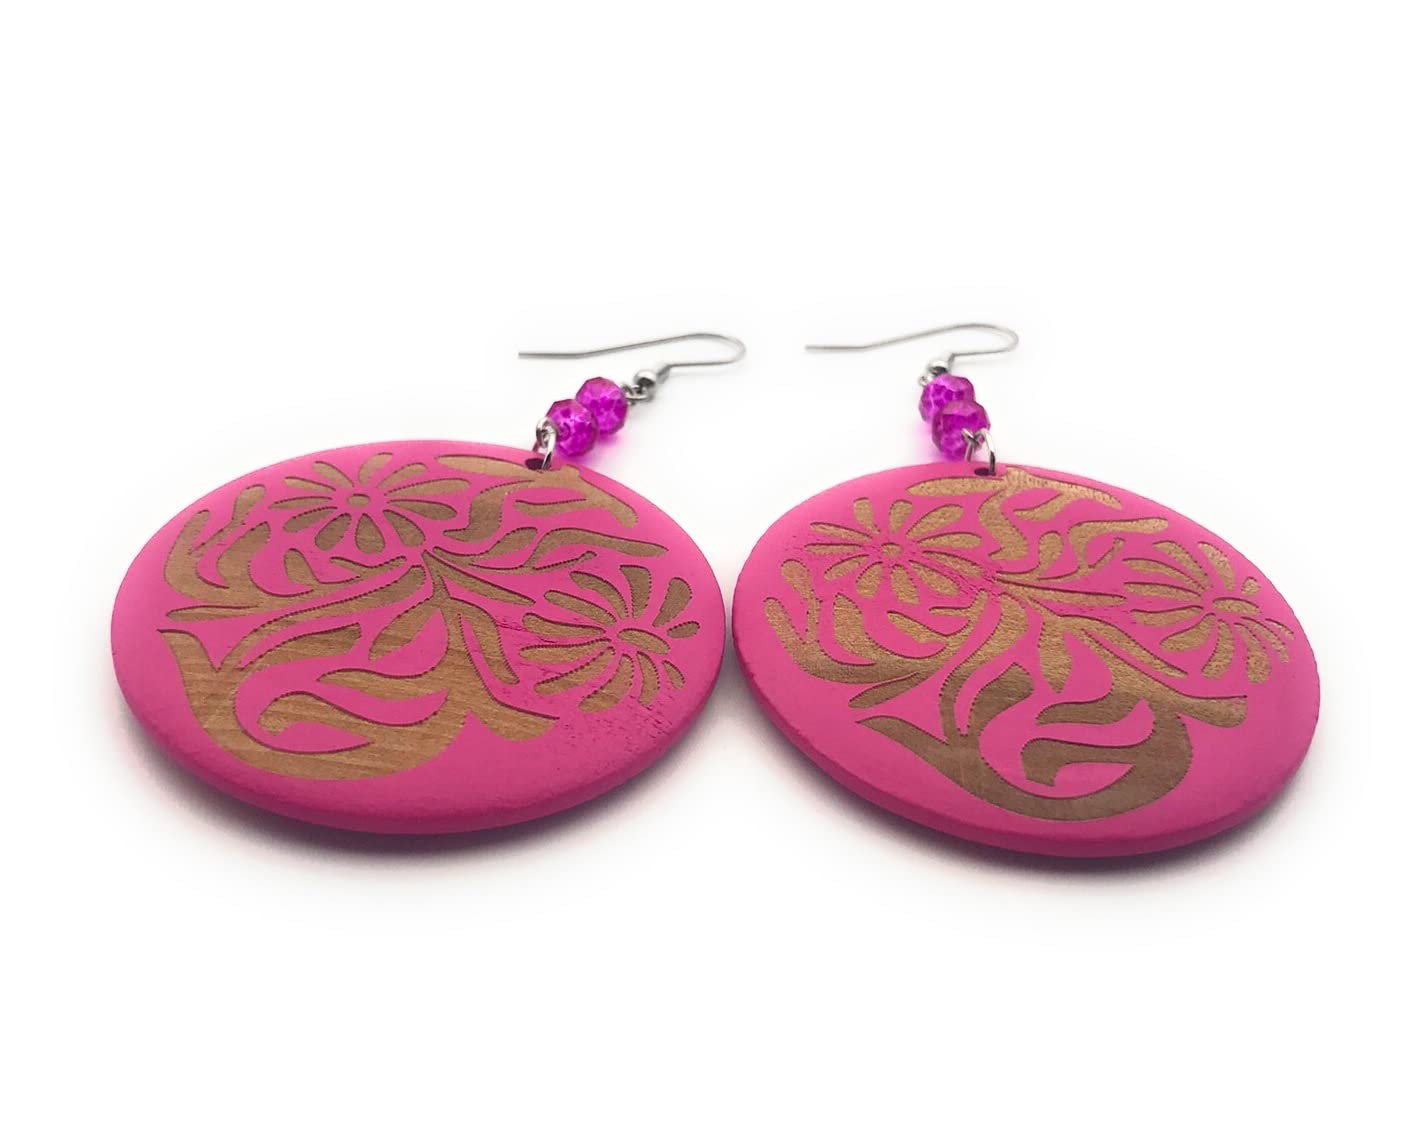 Hot Pink Wooden Dangle Earrings with Beaded Accents Bottom View from Scott D Jewelry Designs